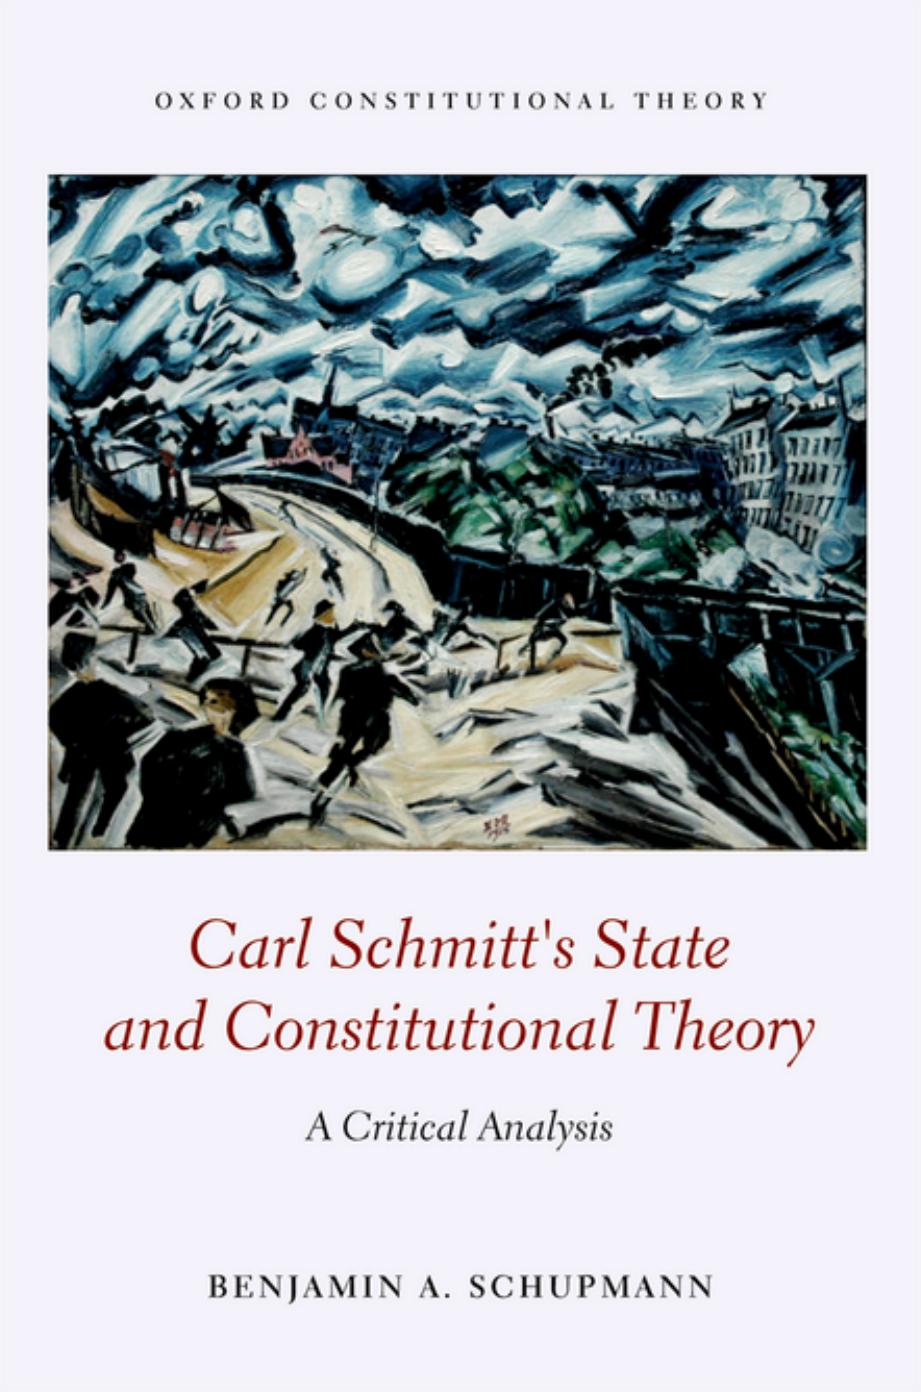 Carl Schmitt's State and Constitutional Theory: A Critical Analysis